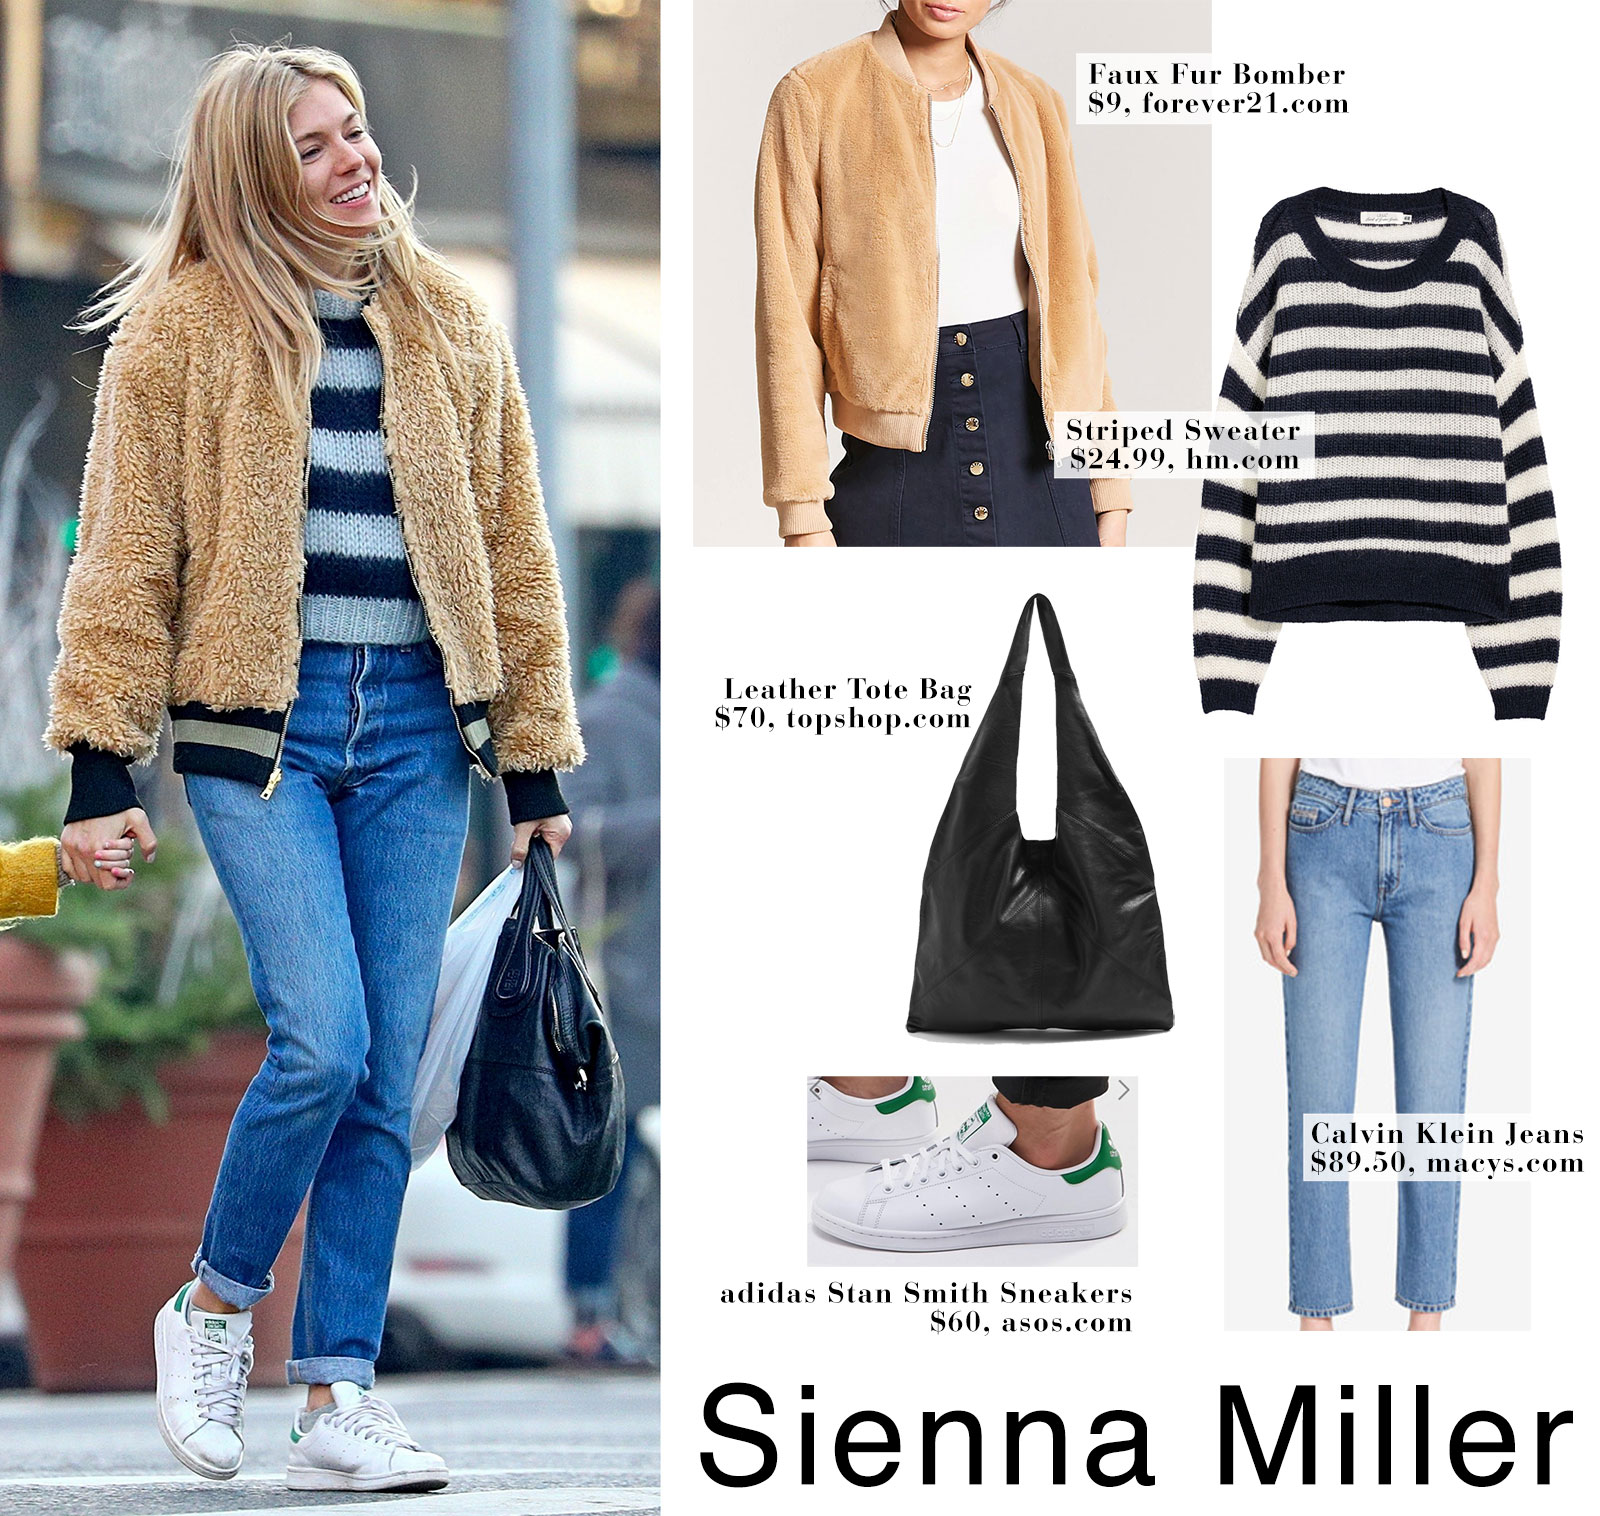 Sienna Miller wears a faux fur bomber jacket with Adidas sneakers with daughter Marlowe while out and about in NYC.